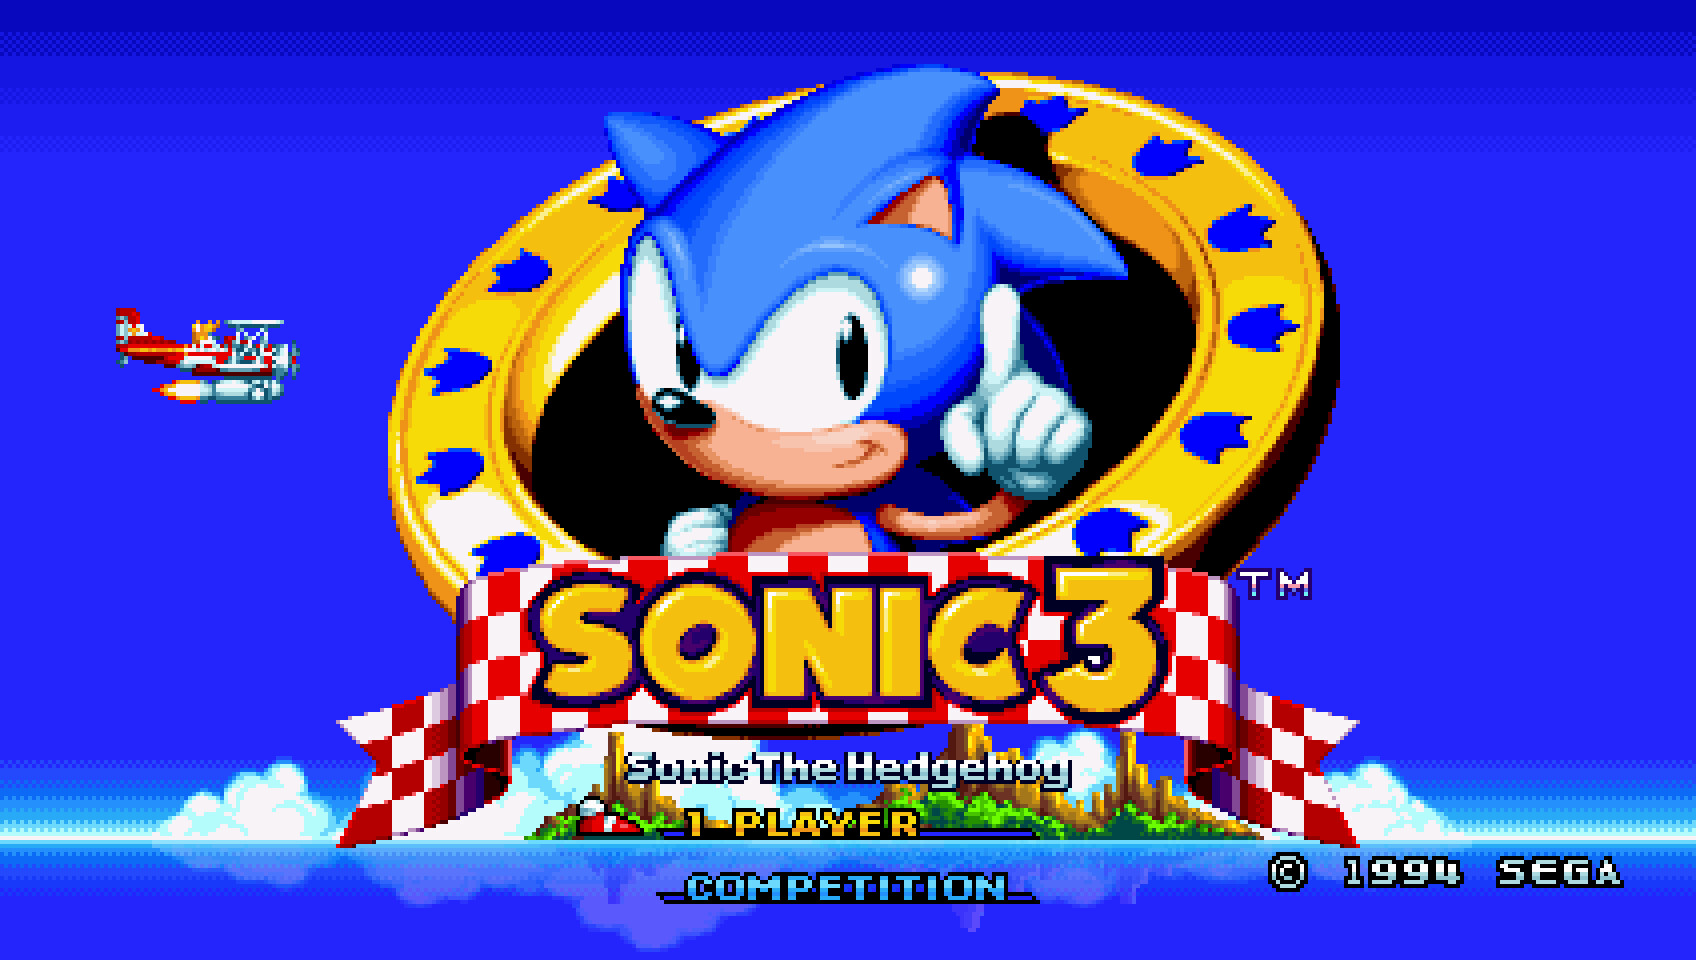 Sonic 3 Air Maniafied. Maniafied Sonic the Hedgehog 2 title Screen. Sonic 3 the Hedgehog босс. Modgen Sonic 3 Air. Соник air